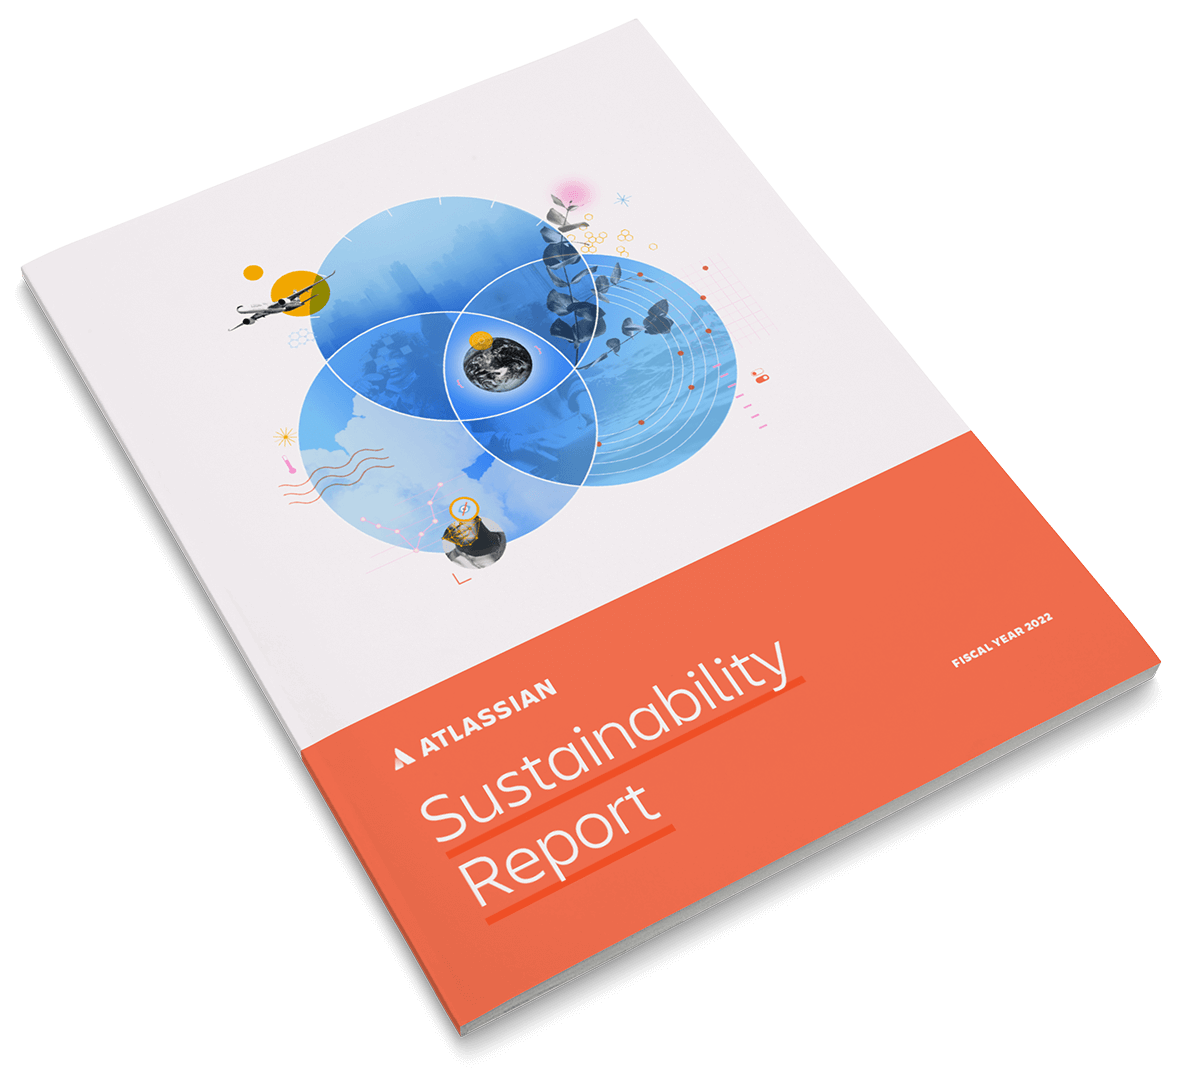 2022 Sustainability Report Cover